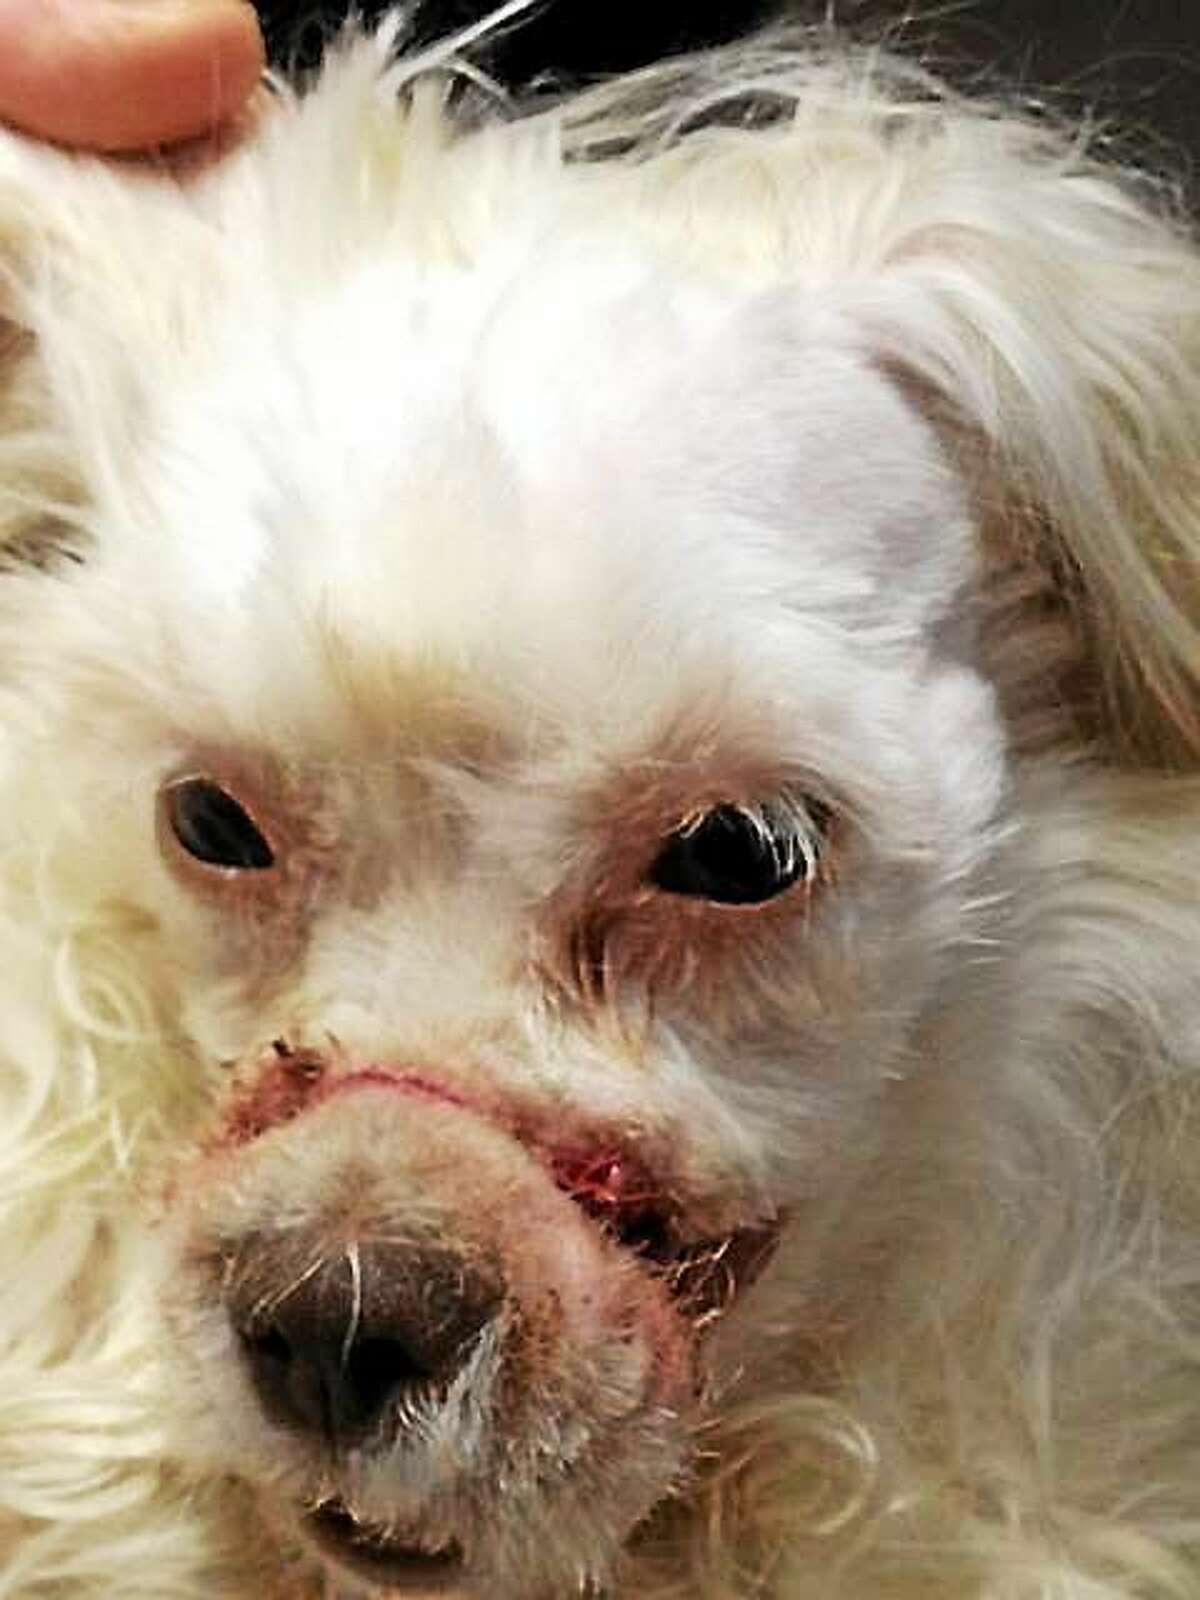 Meriden Police are searching for the owner of this year-old Maltese/poodle mix who was found wandering in distress with an elastic band around her snout. Police say the band embedded into the dog’s flesh and prevented it from eating.